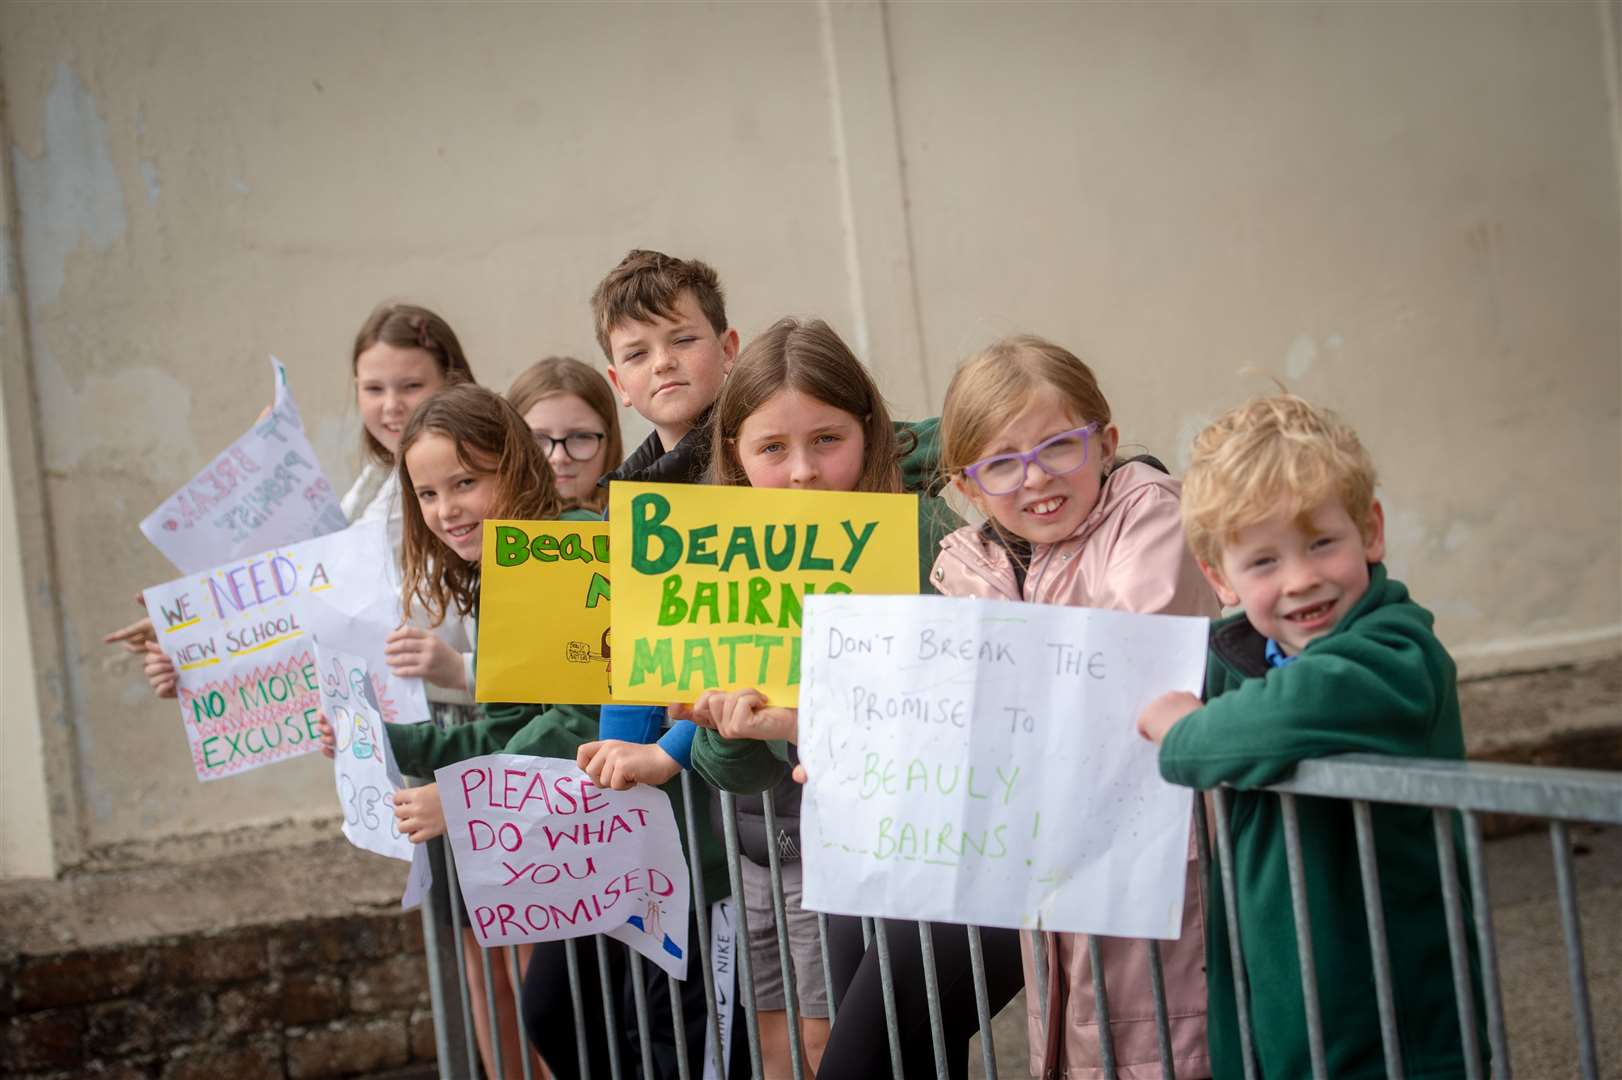 Beauly Bairns Matter, say children as they highlight the need for a new school in Beauly with homemade posters.